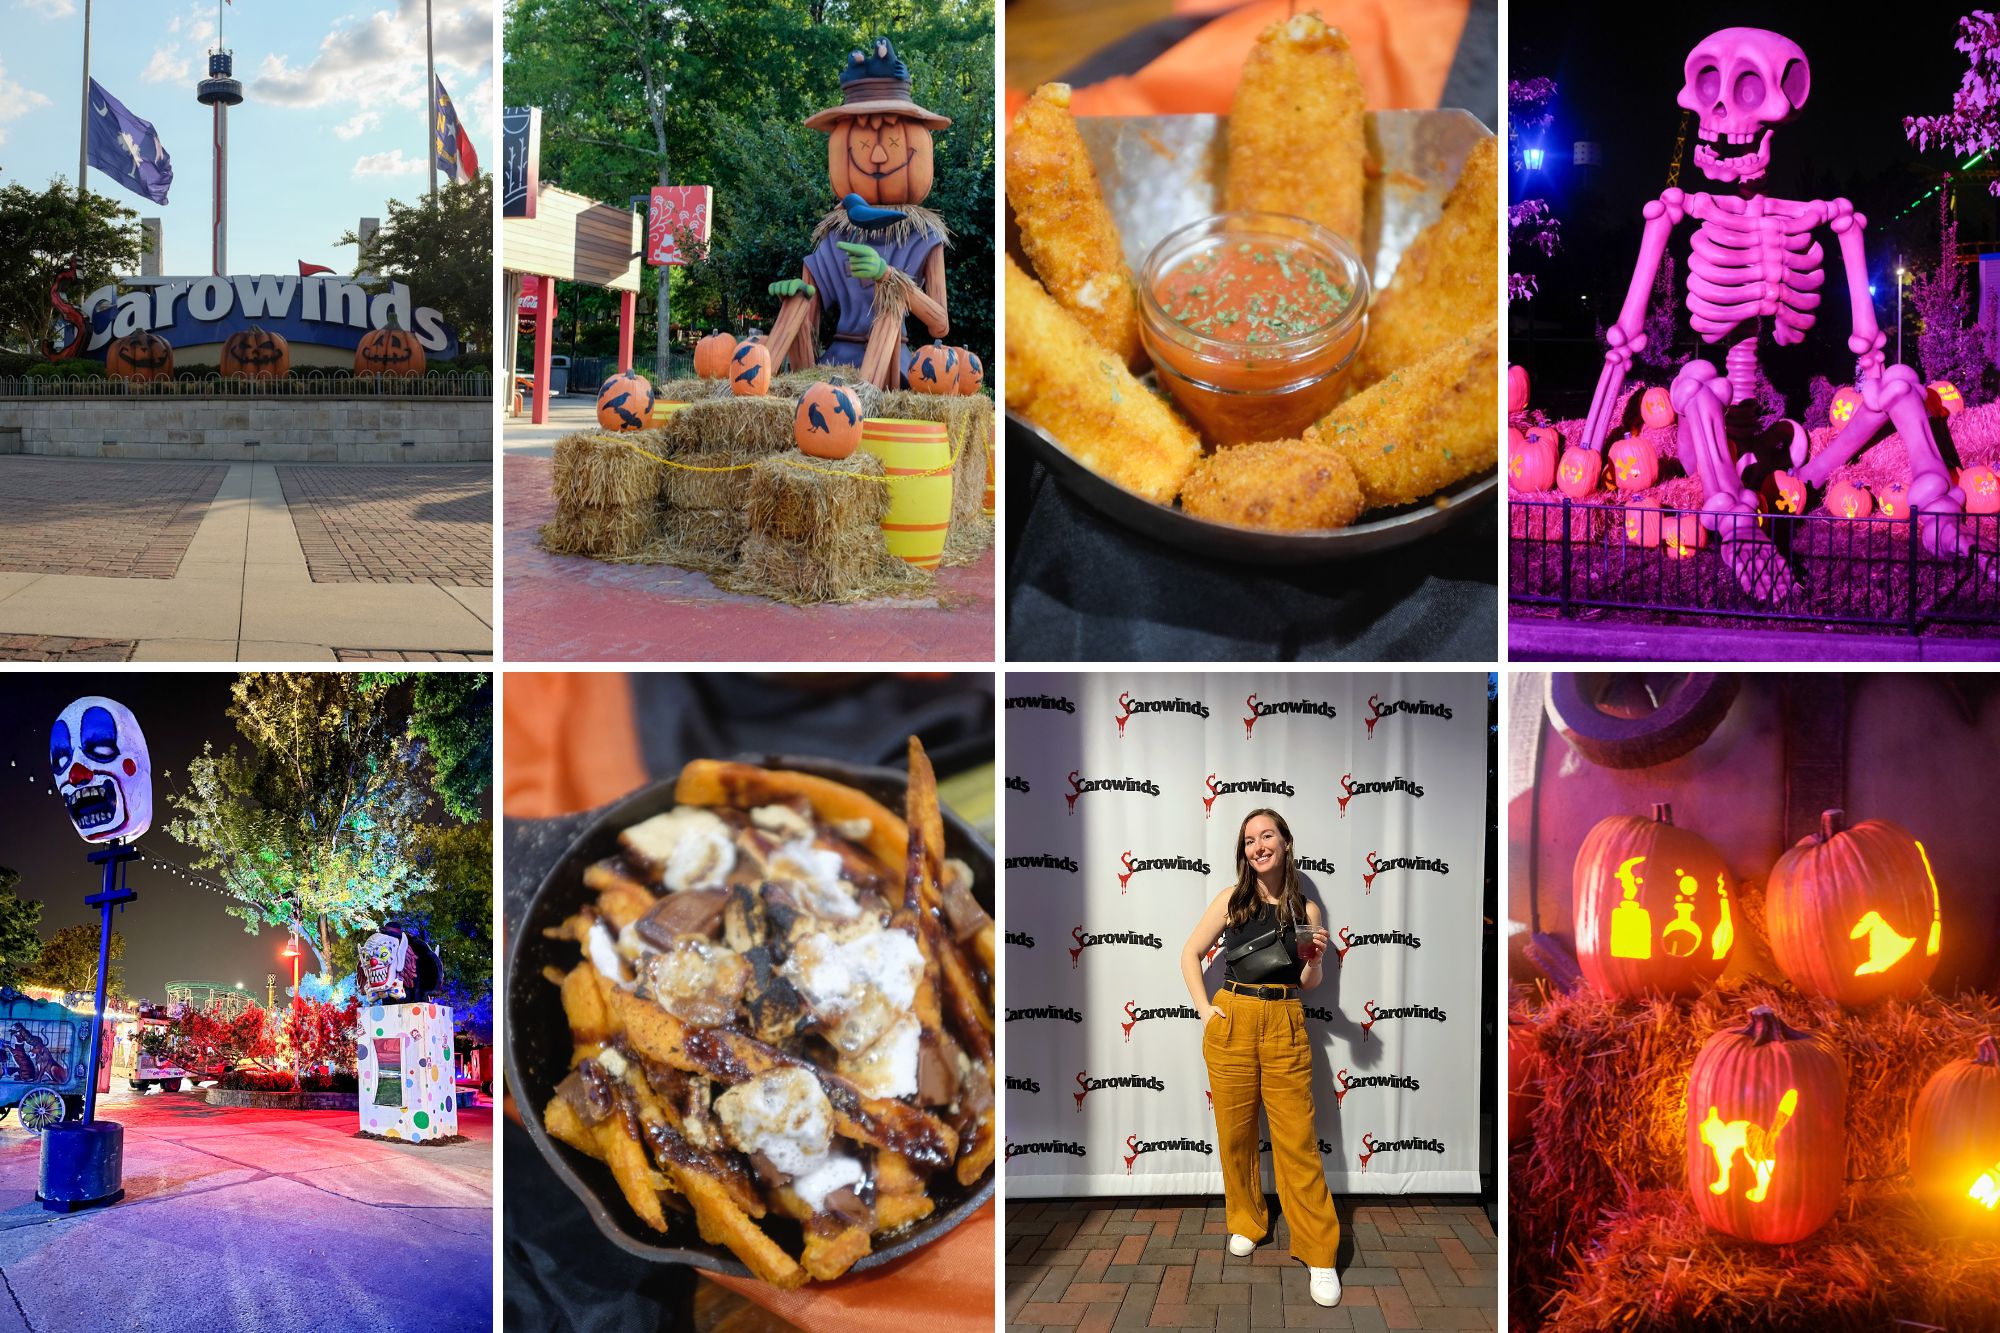 Collage of images from SCarowinds